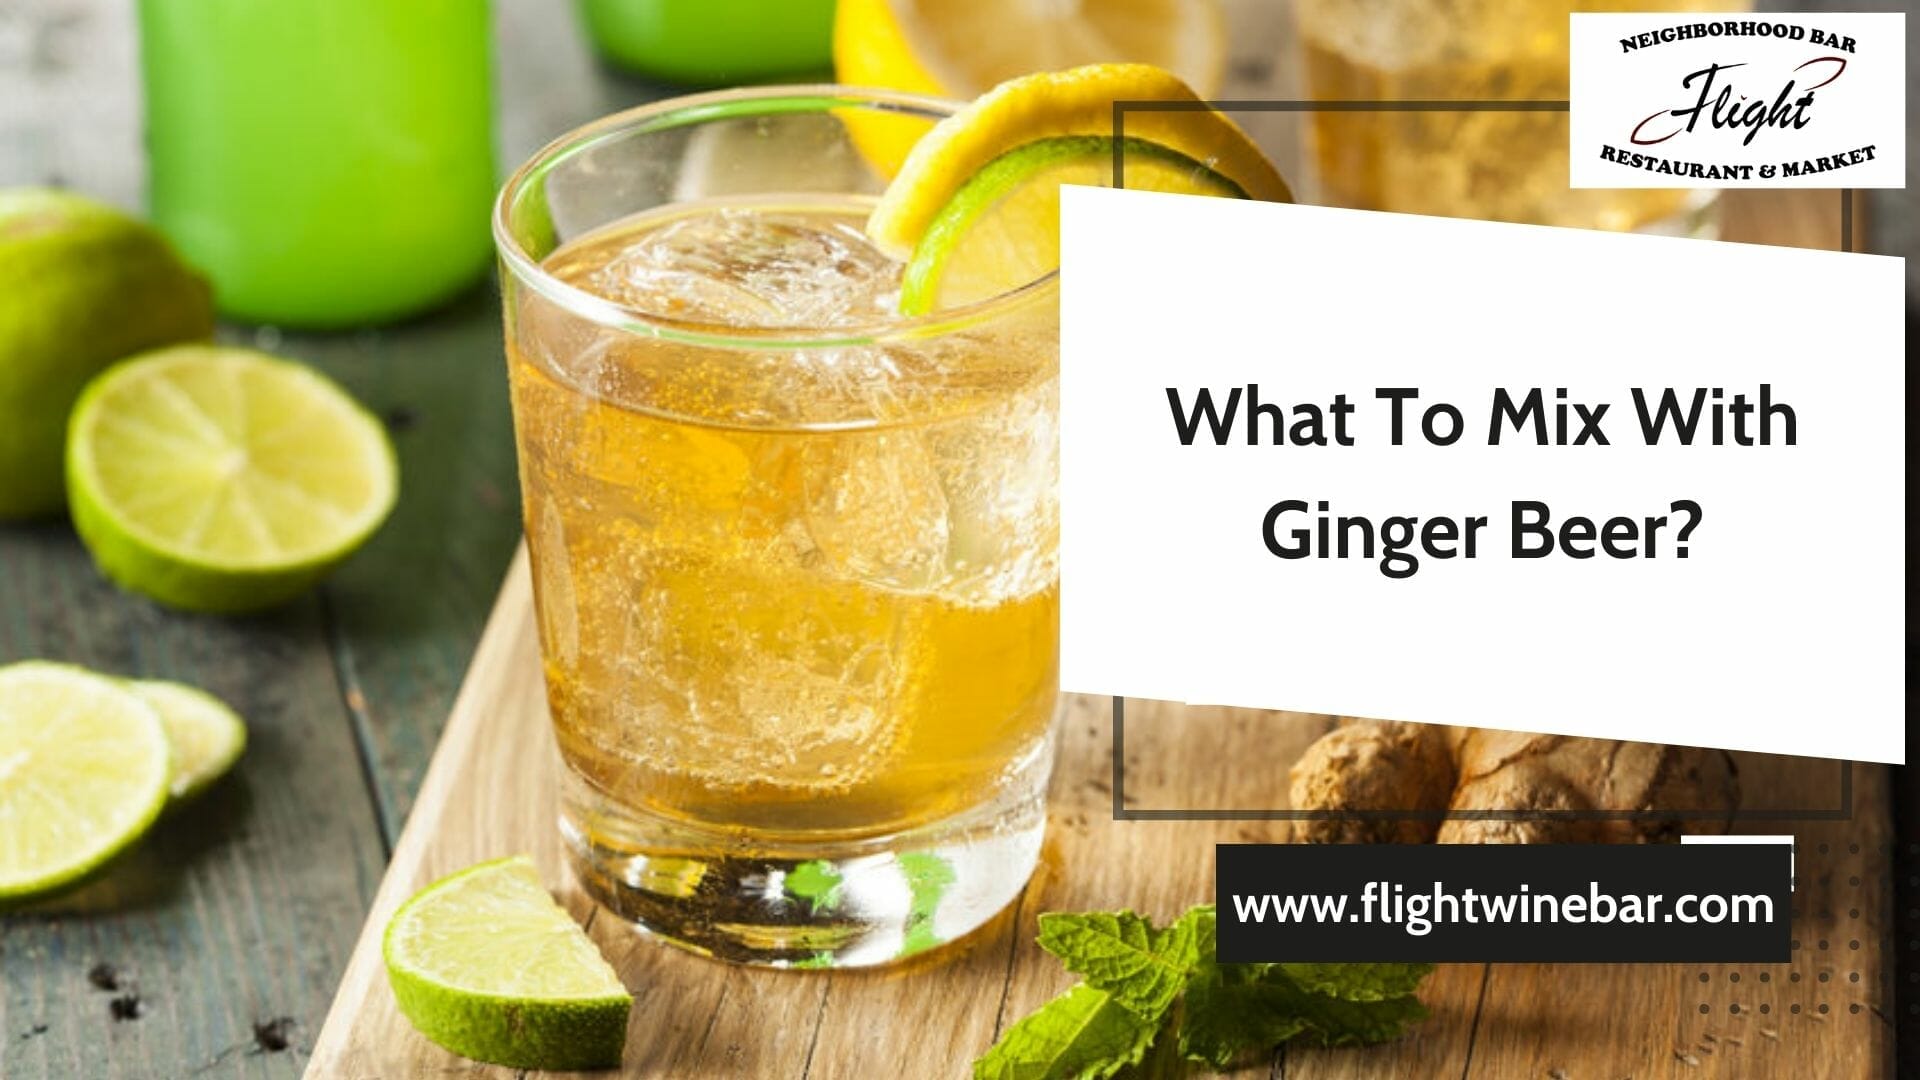 What To Mix With Ginger Beer